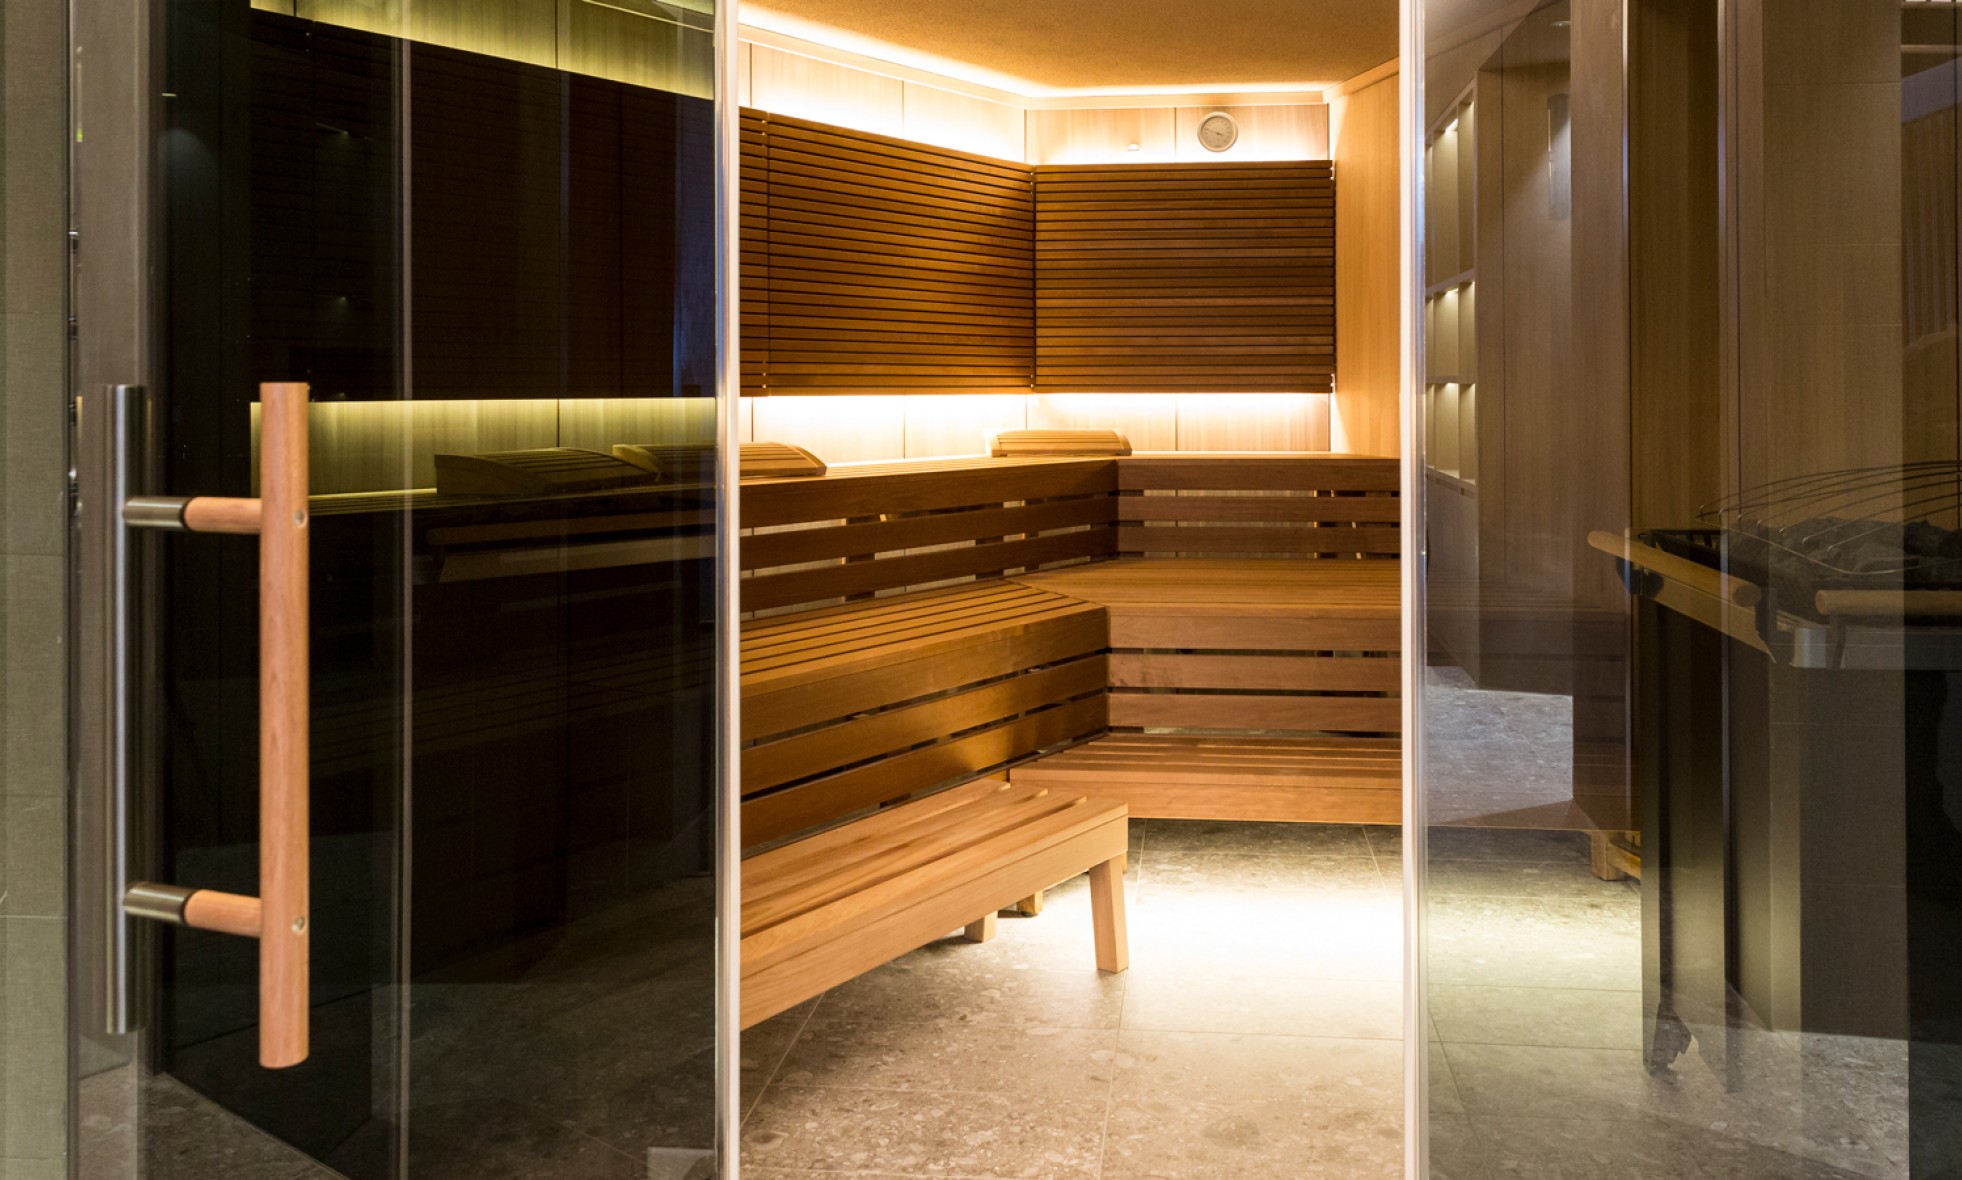 Luxury SPA and sauna and fitness Italy South Tyrol Dolomites apt for rent